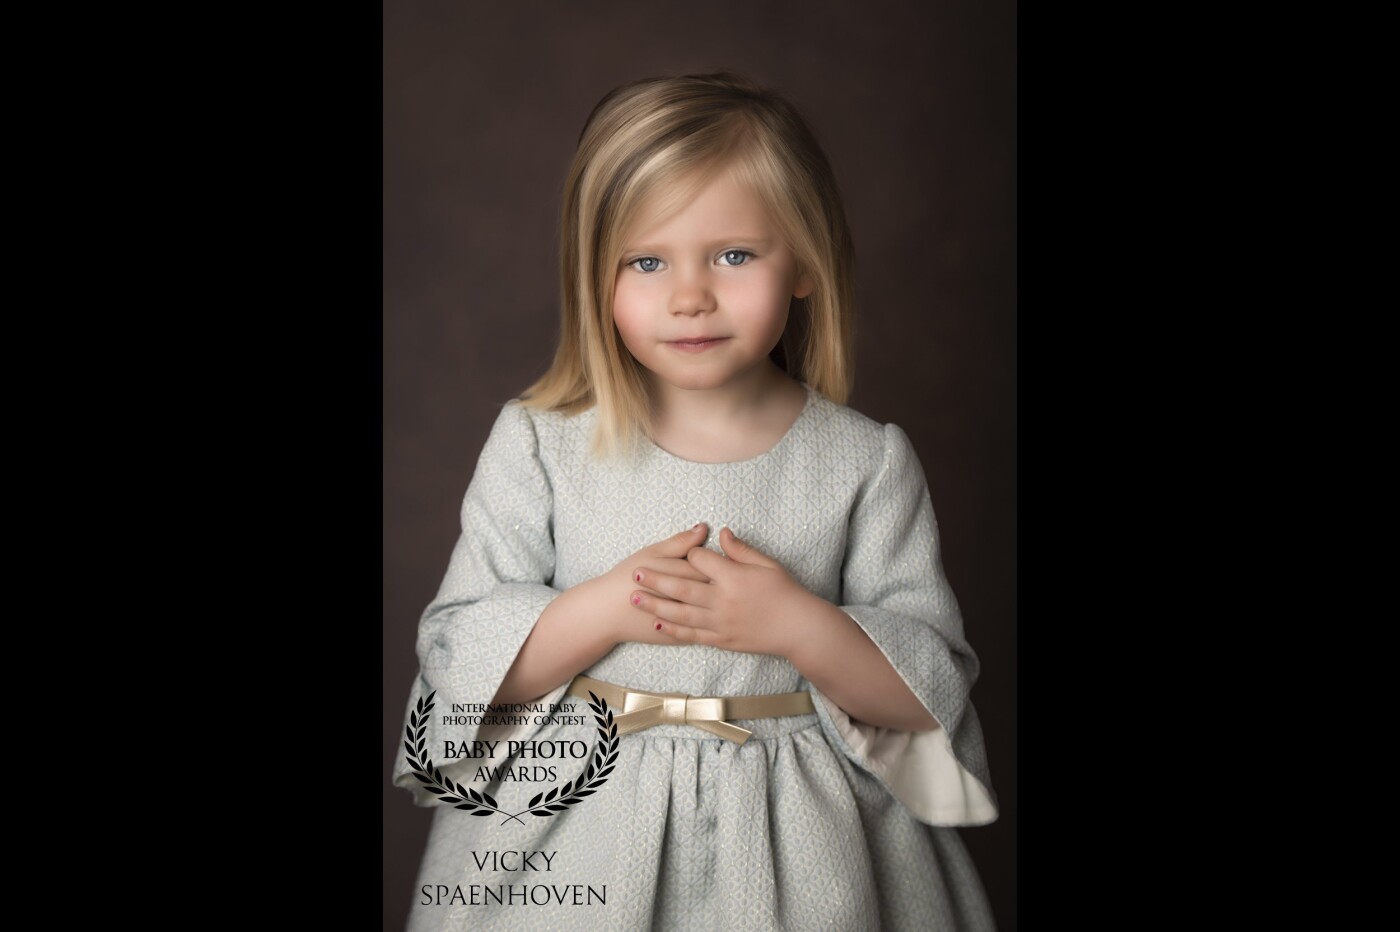 It was a pleasure to photograph this beautiful little lady, Liesel. I used one big softbox to create soft light. Thanks for choosing this pure portrait.❤️